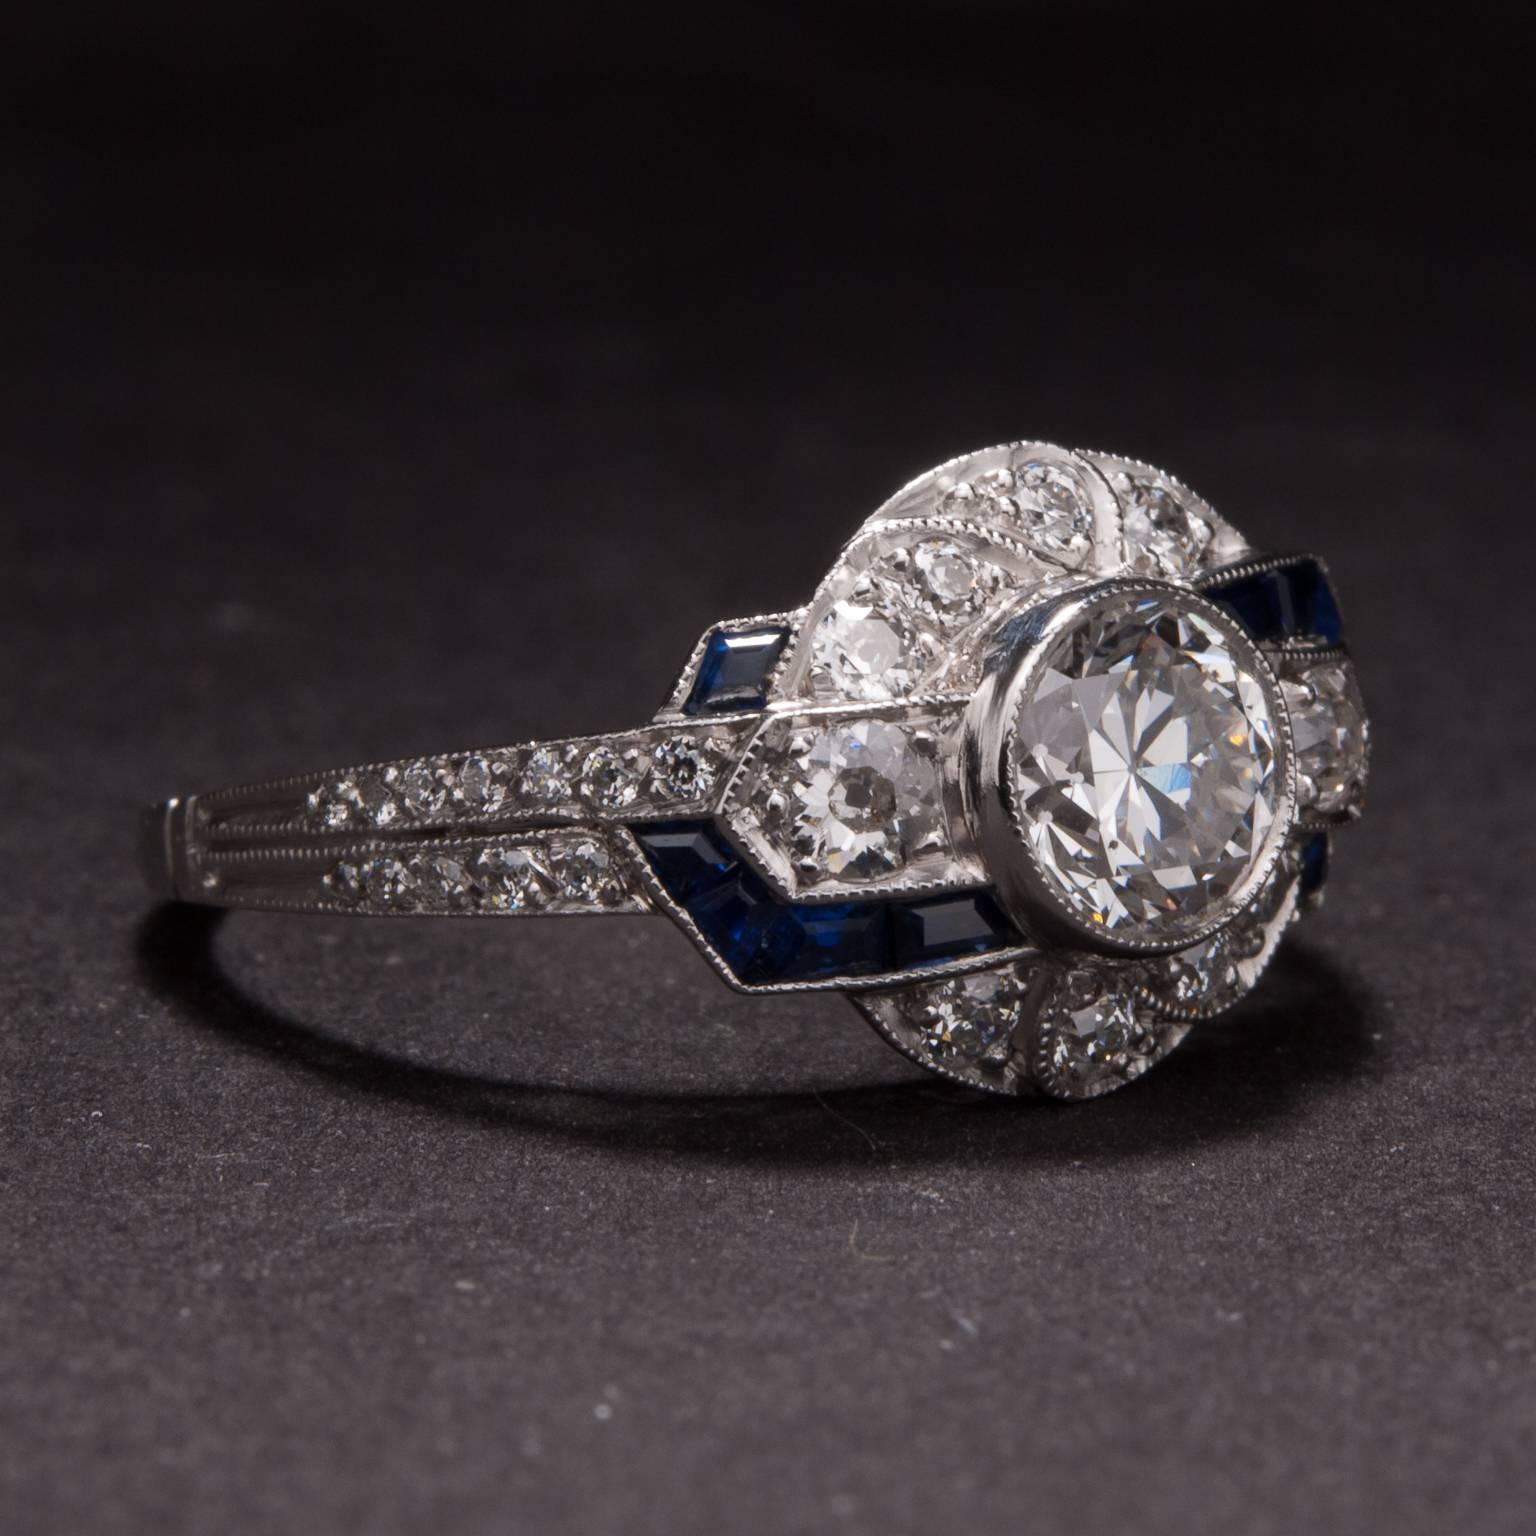 This extraordinary diamond and sapphire ring features a .82 carat center diamond and .25 carat of accent sapphires. The ring is crafted in platinum and the mounting includes an additional .65 carats of accent diamonds. 